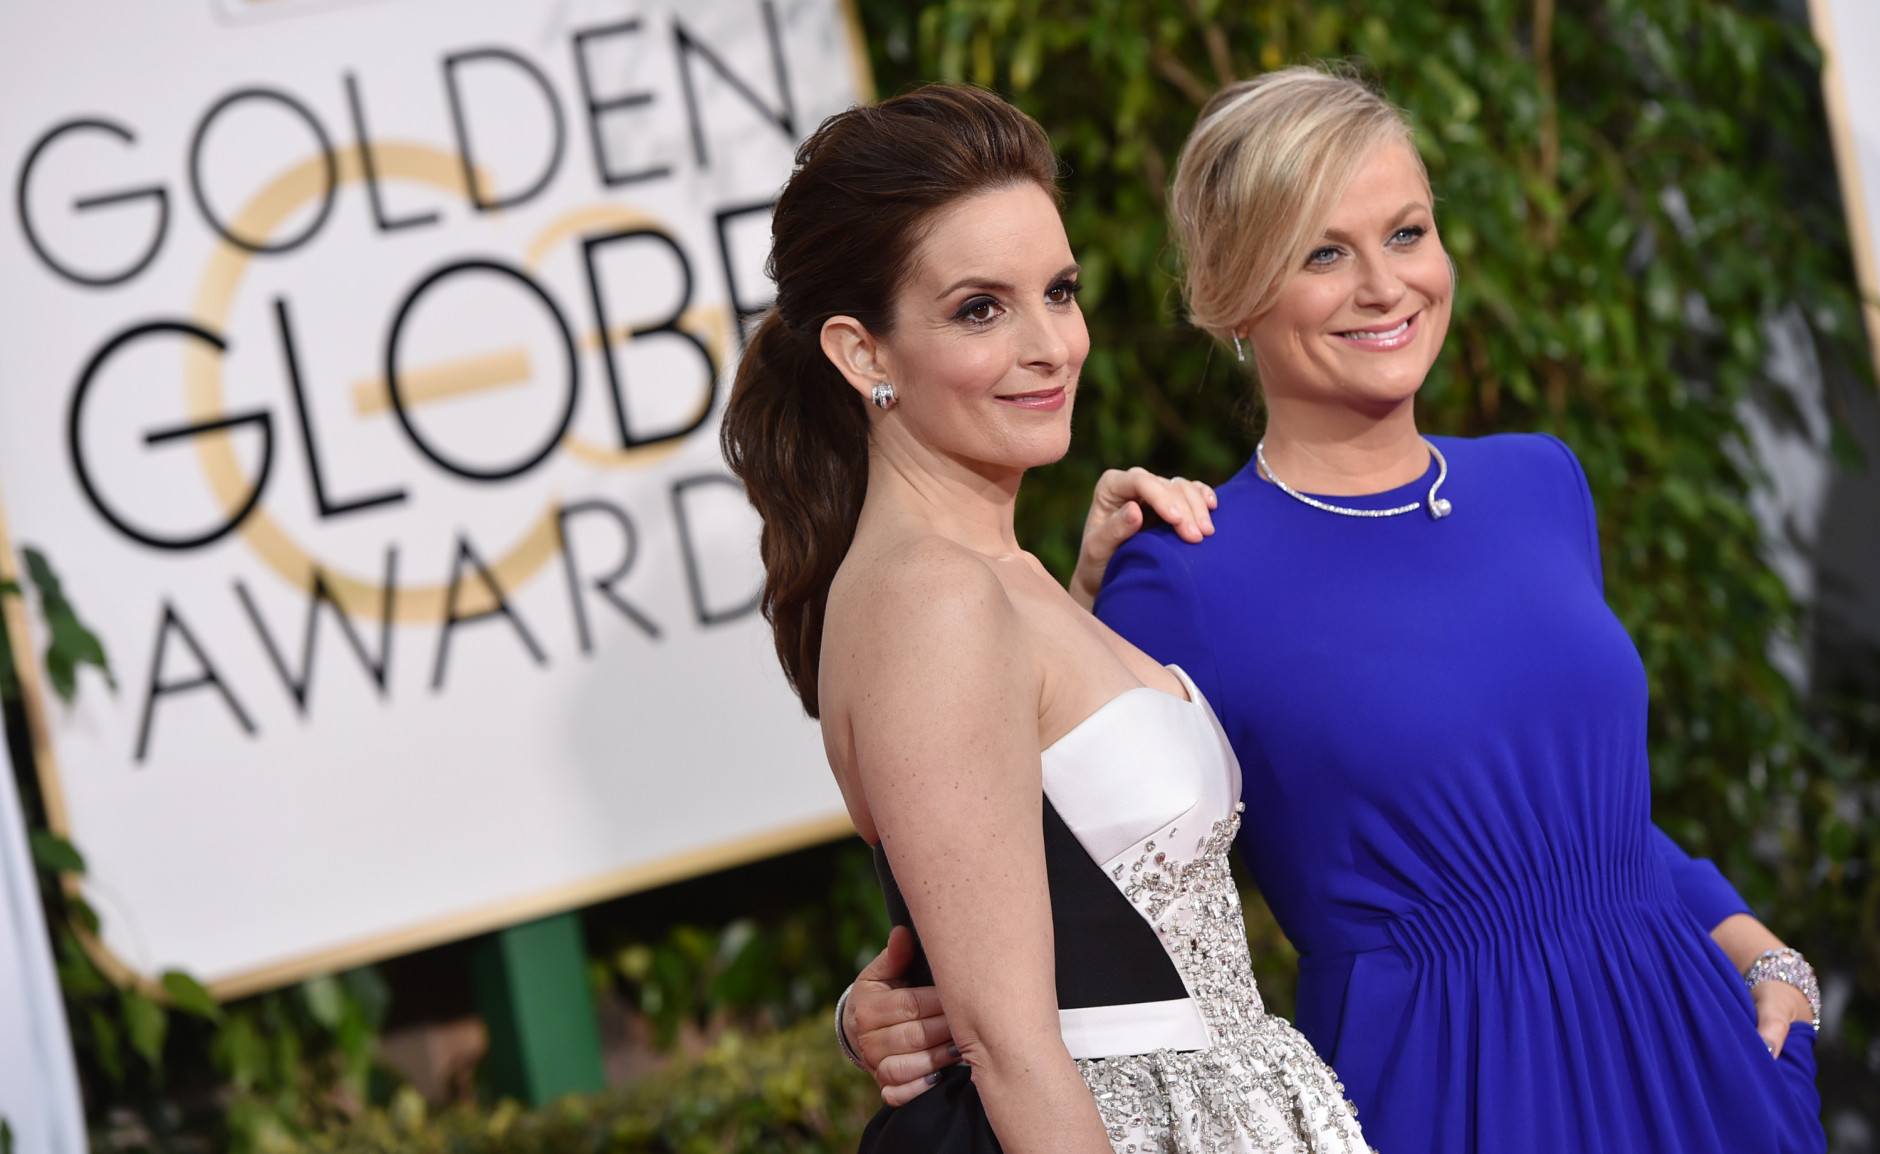 Tina Fey, left, and Amy Poehler arrive at the 72nd annual Golden Globe Awards at the Beverly Hilton Hotel on Sunday, Jan. 11, 2015, in Beverly Hills, Calif. (Photo by John Shearer/Invision/AP)